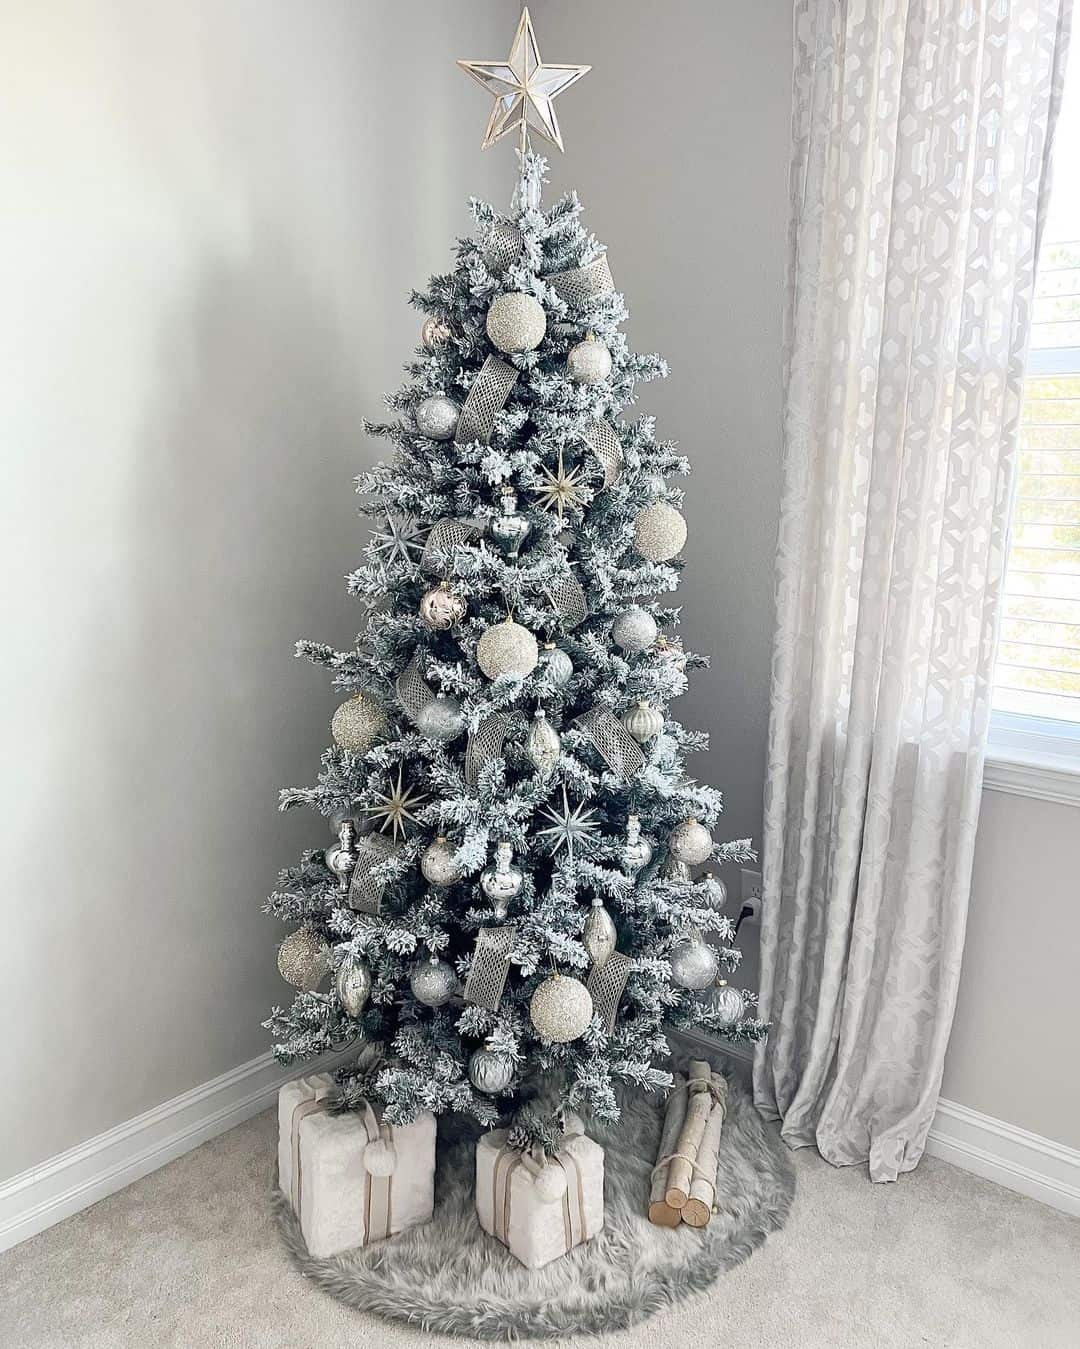 Frosted Christmas Tree with Metallic Silver Decorations - Soul & Lane